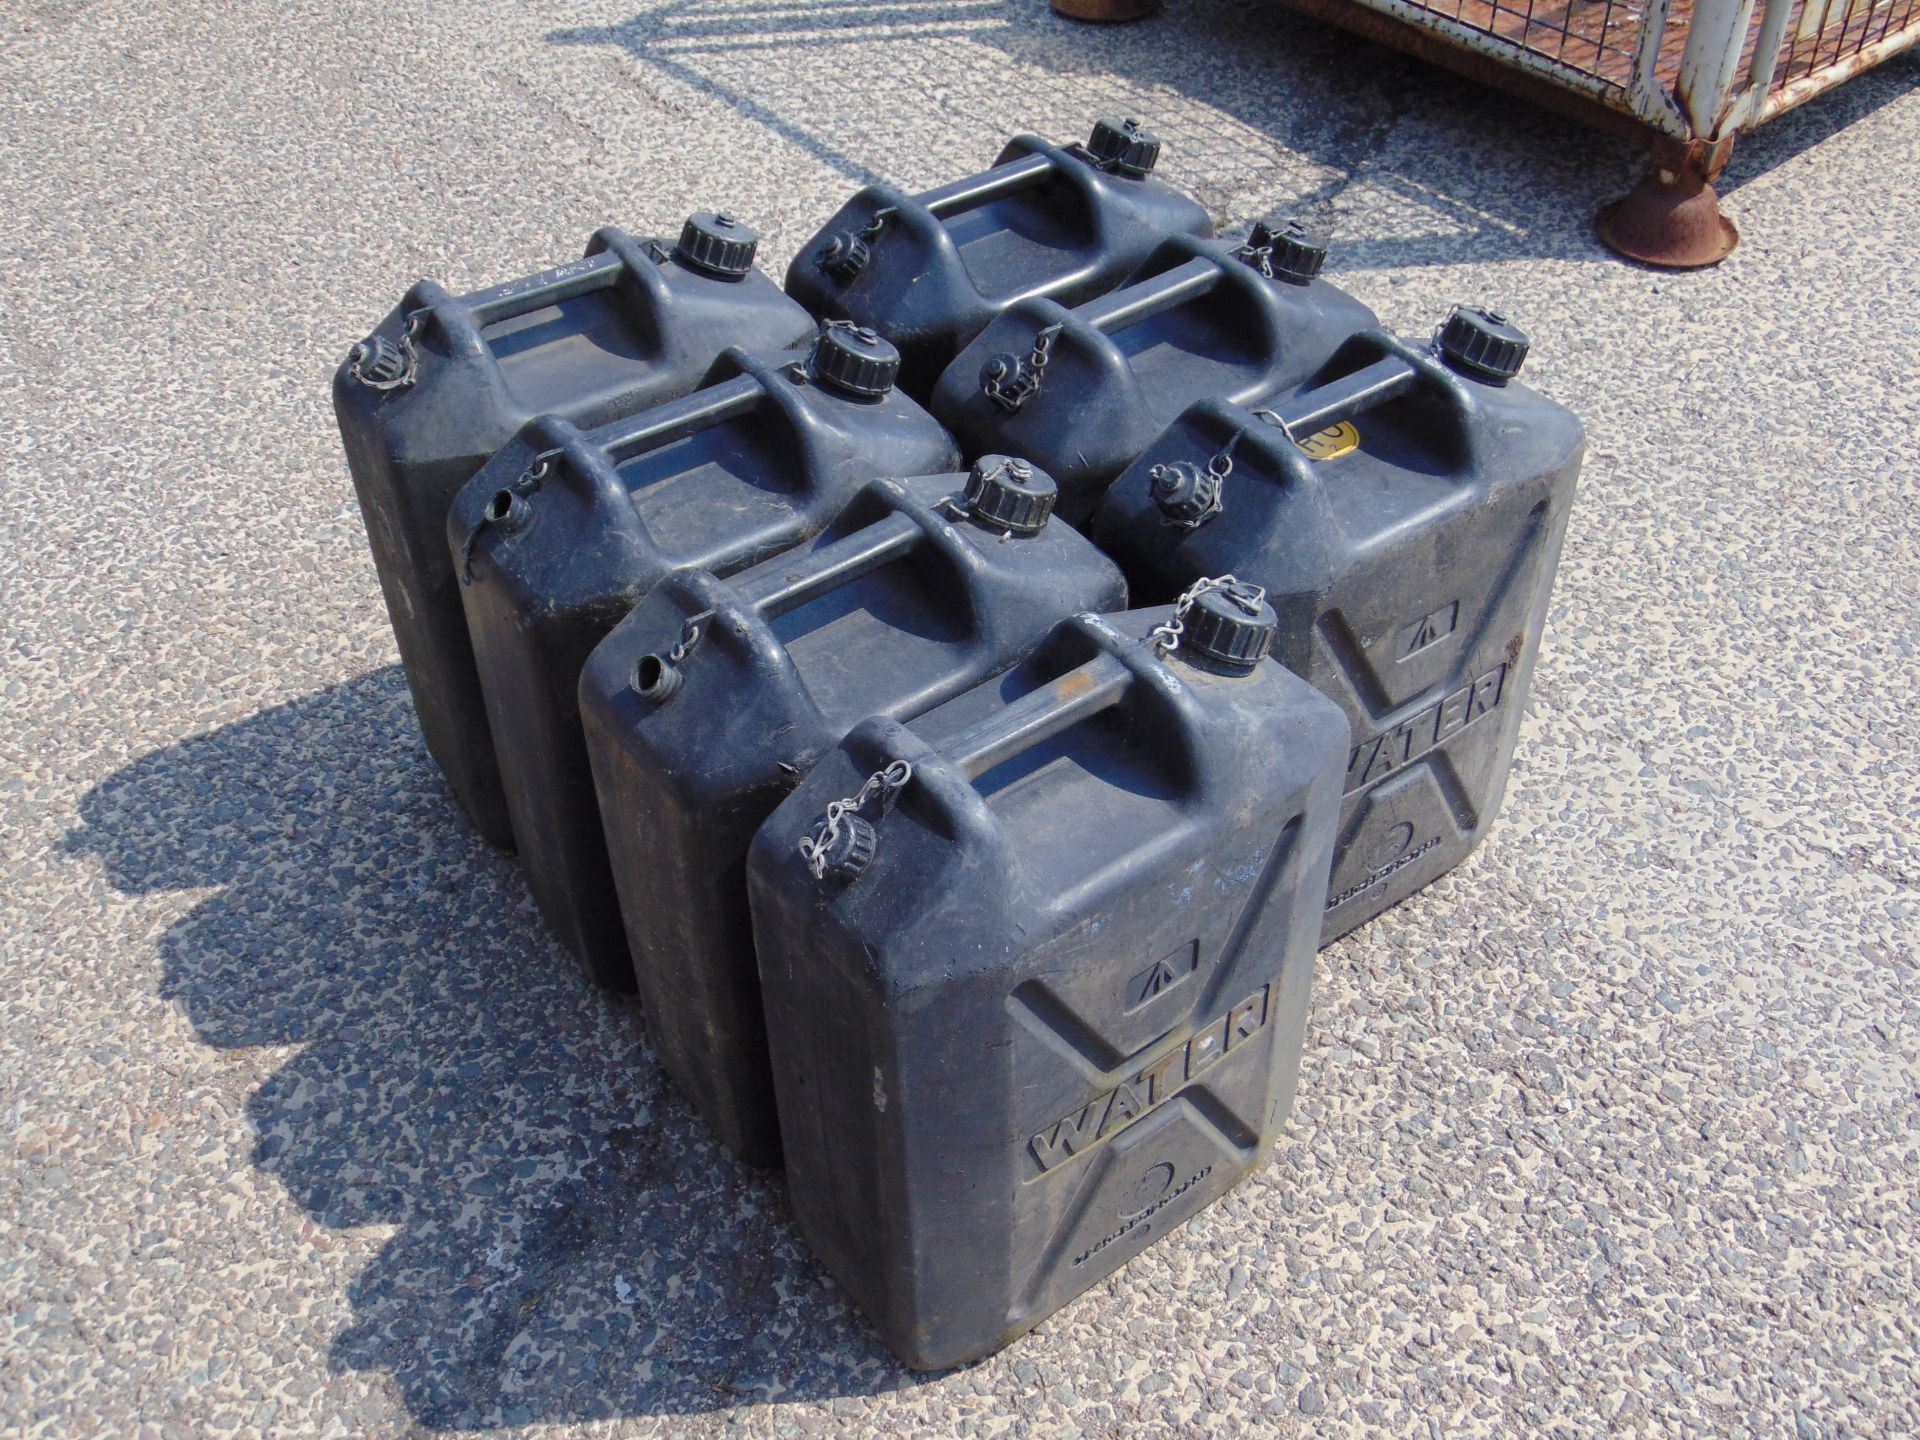 7 x Standard Nato 5 gall Water Jerry Cans as shown